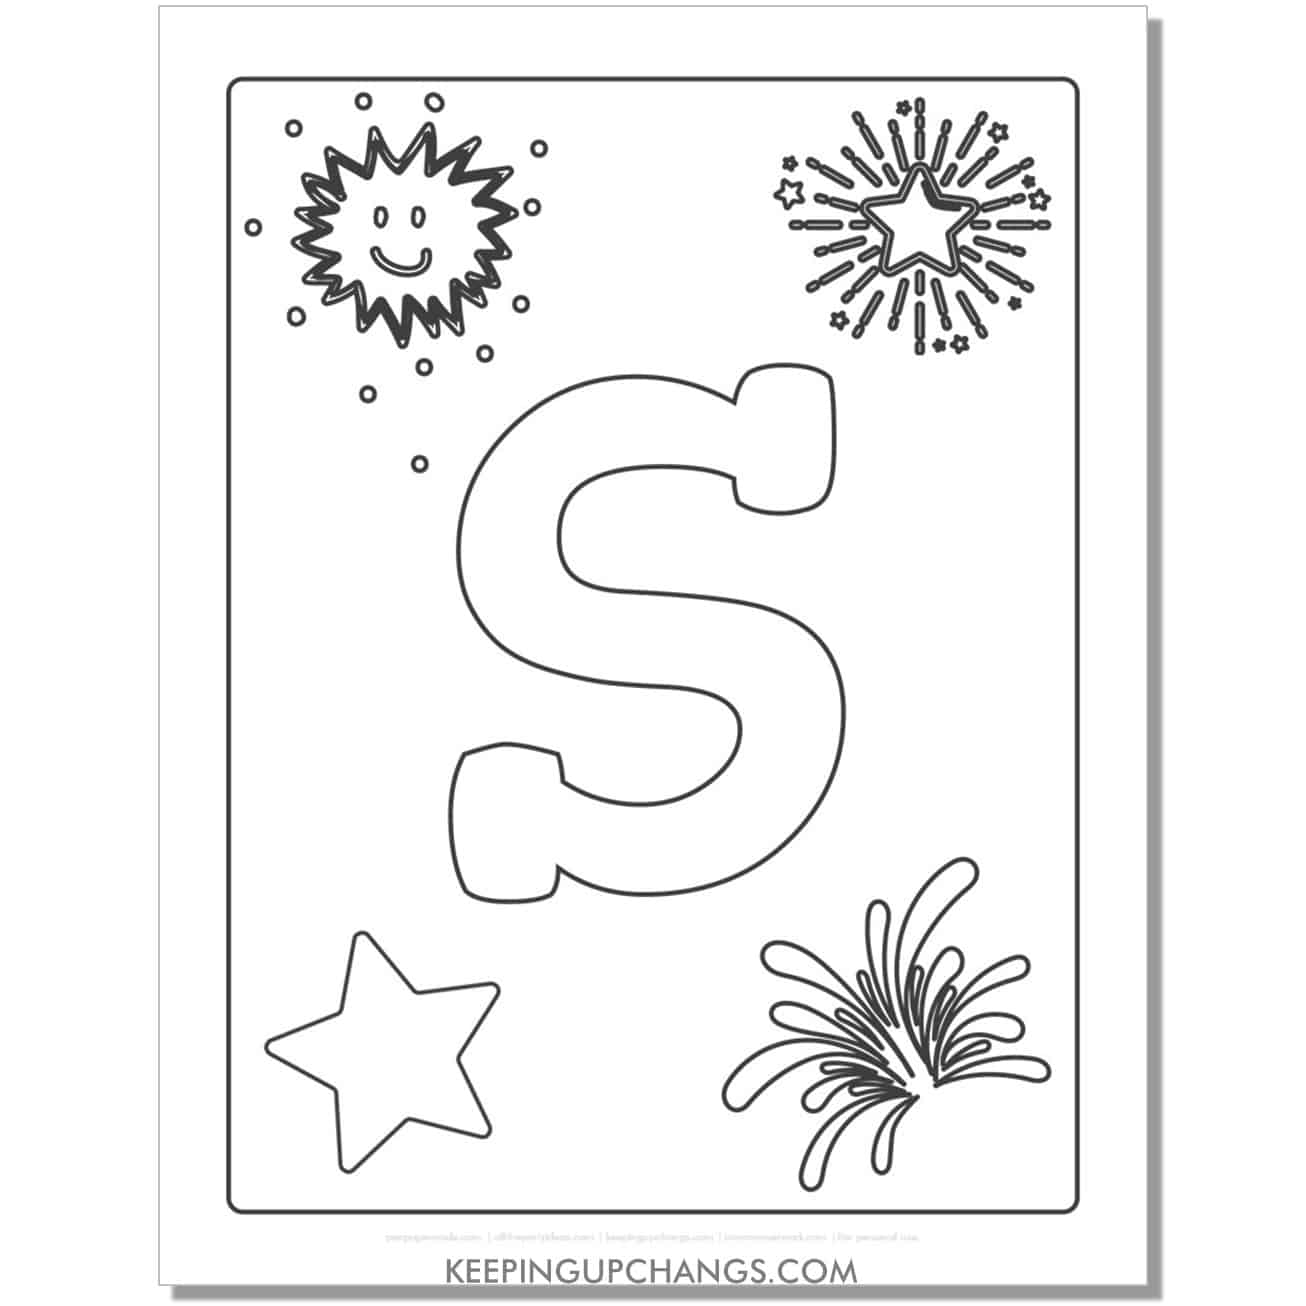 cool letter s to color with stars, space theme.